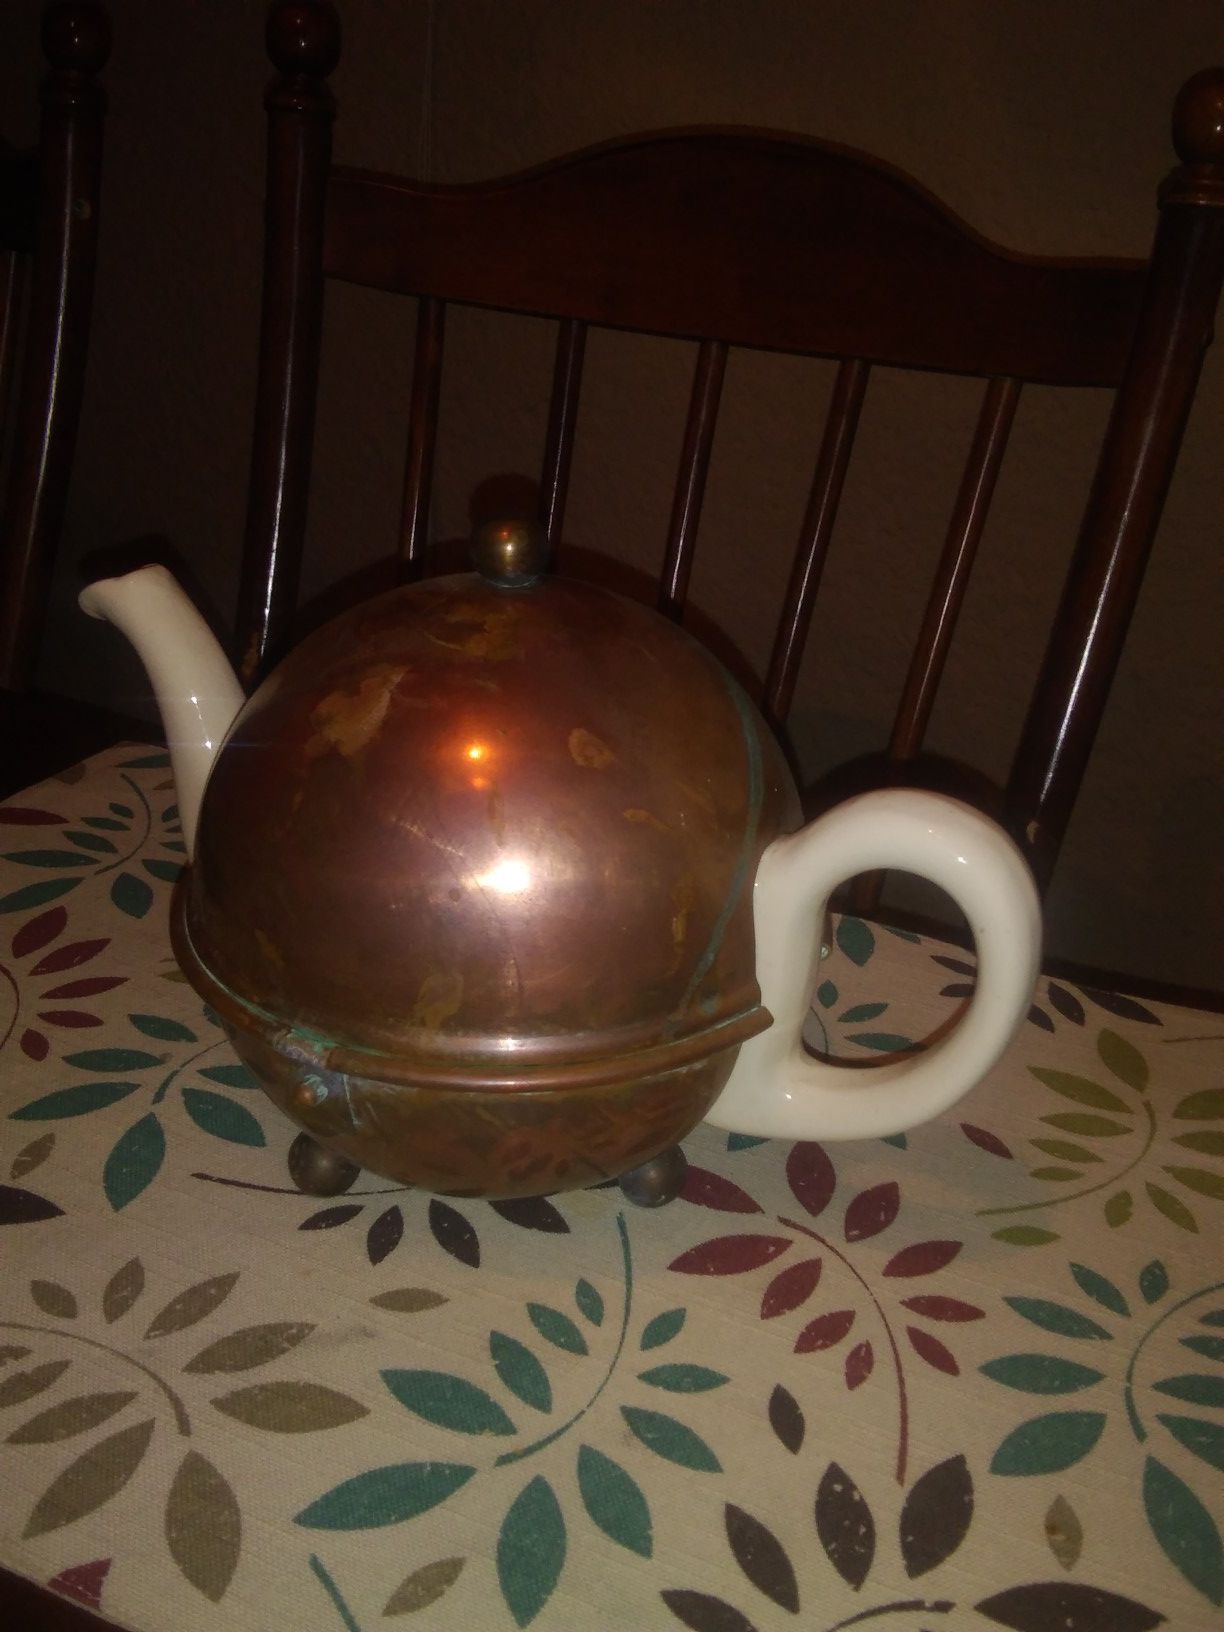 Copper and ceramic tea pot for display only chips not visible